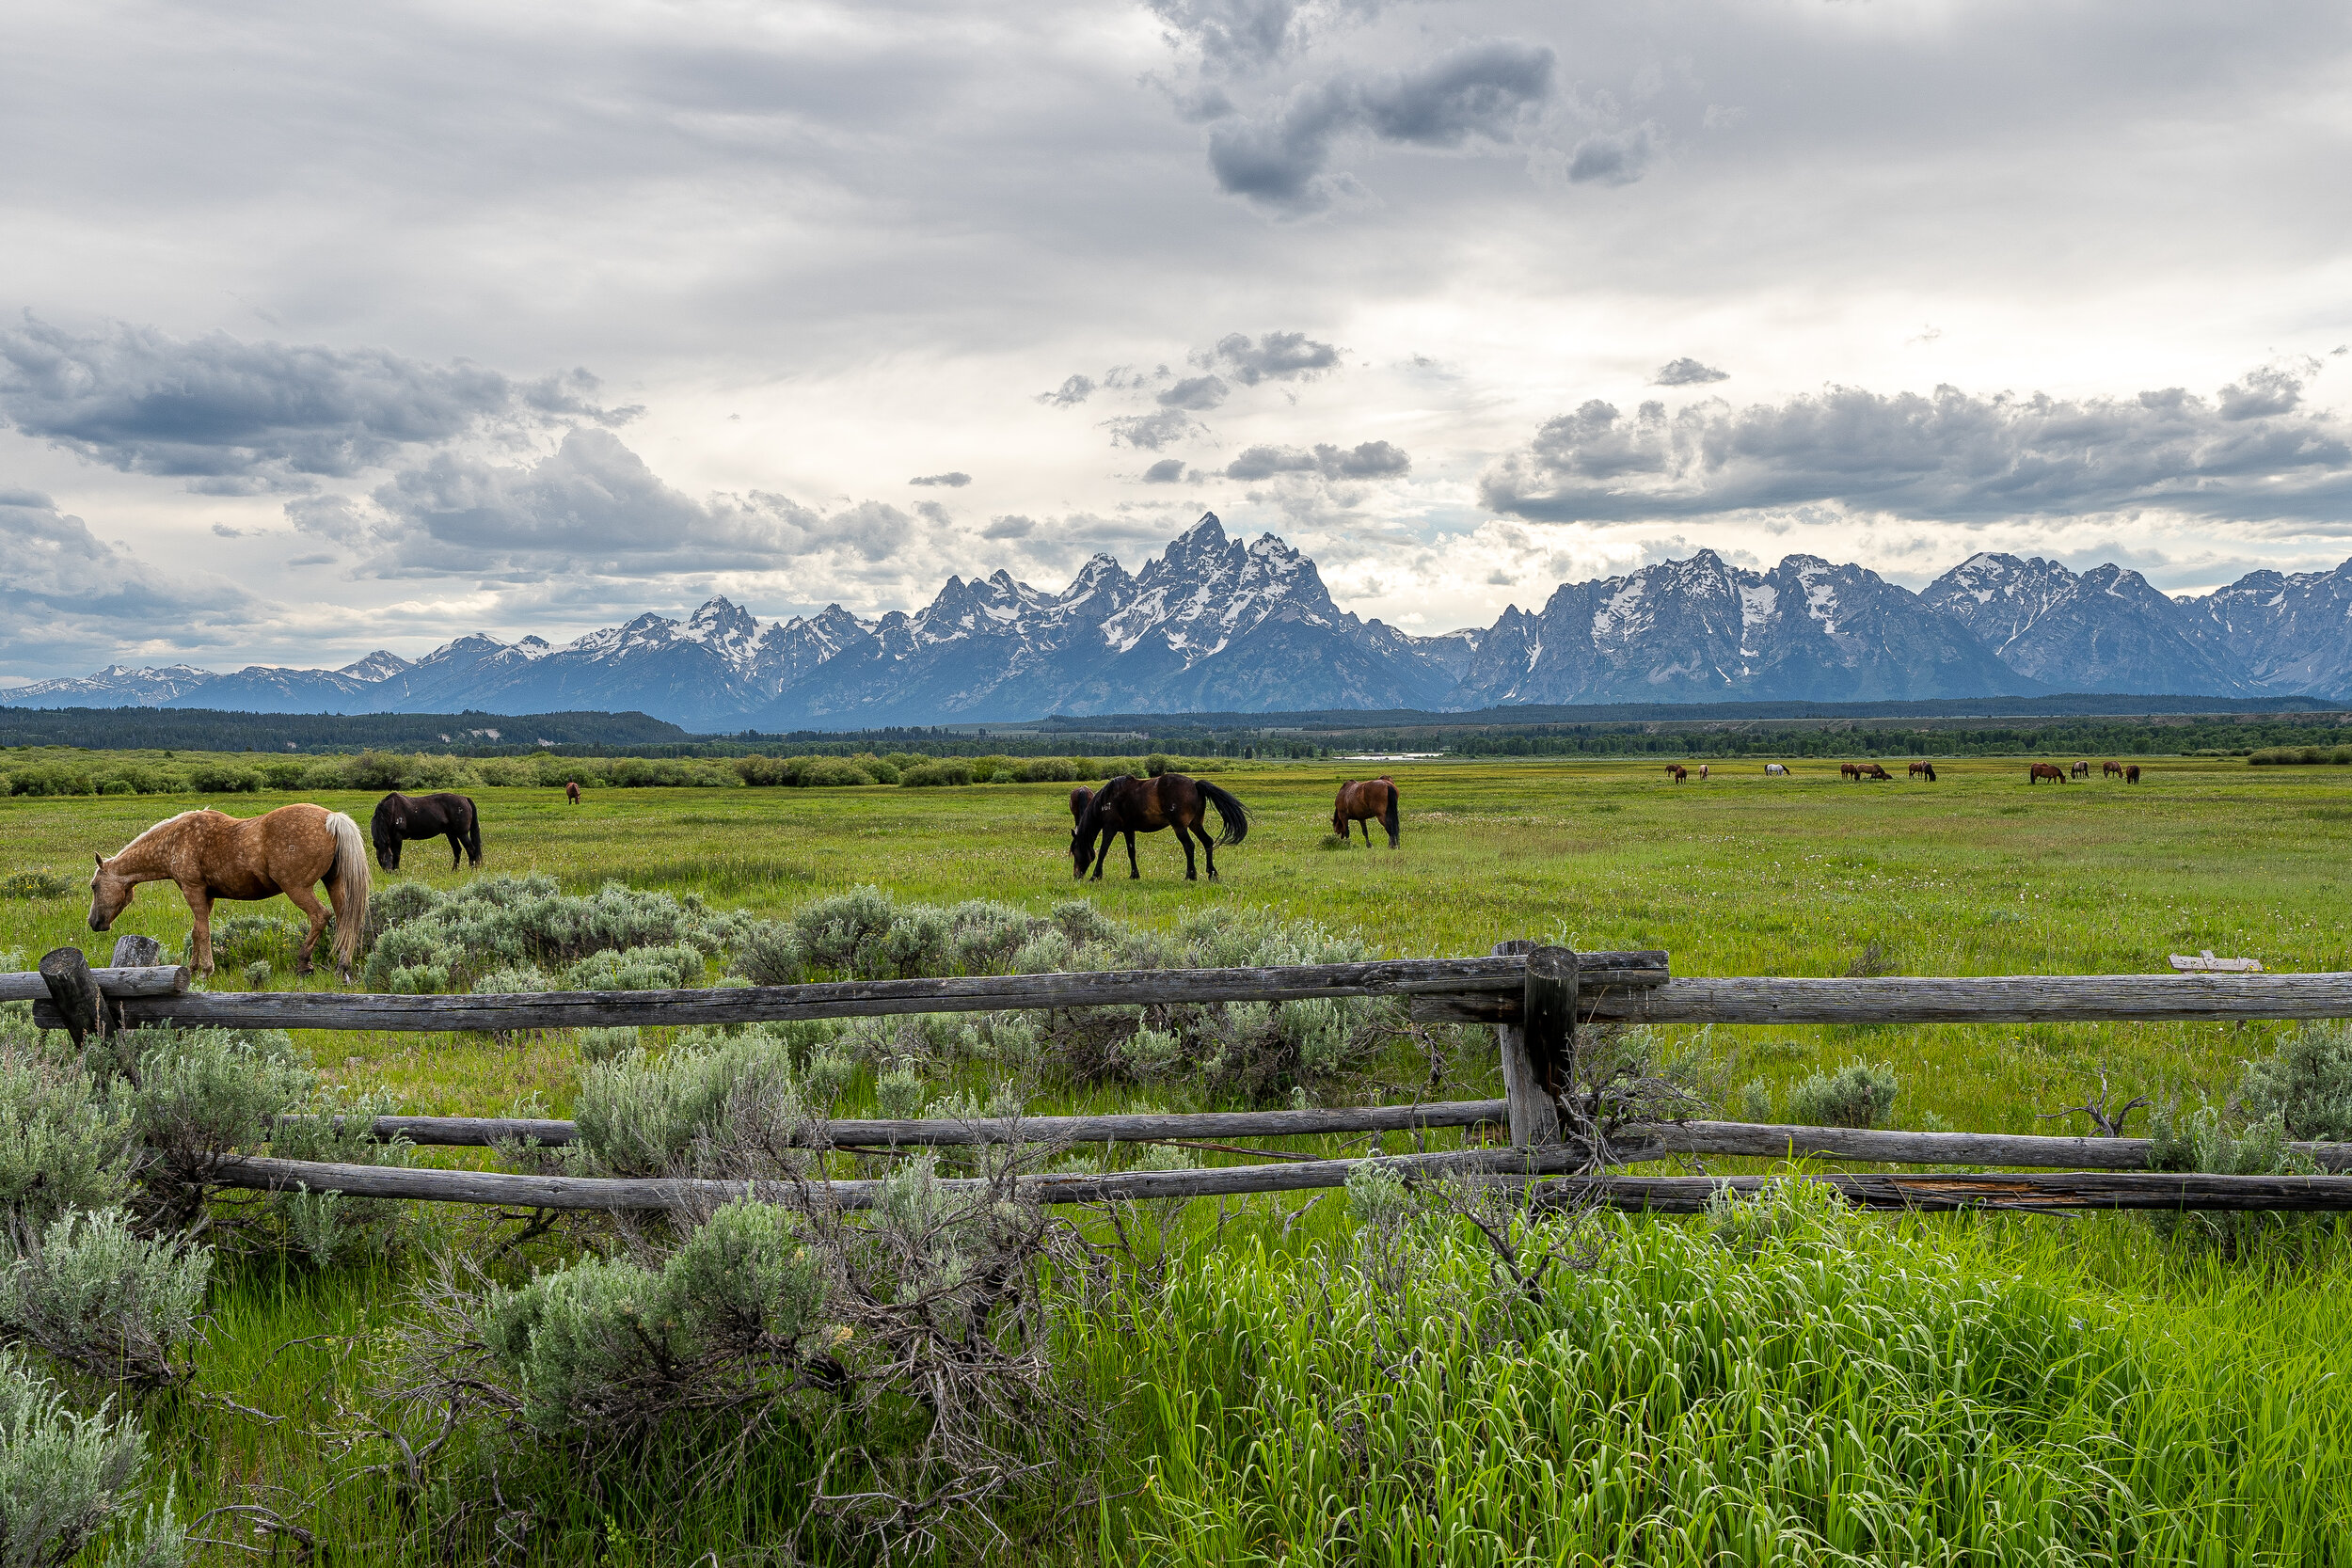  Grand Teton National Park covers about 480 square miles and is made up of the Teton Range (pictured here) and most of the northern sections of the surrounding valley known as Jackson Hole. This mountain range was named by French trappers who first s